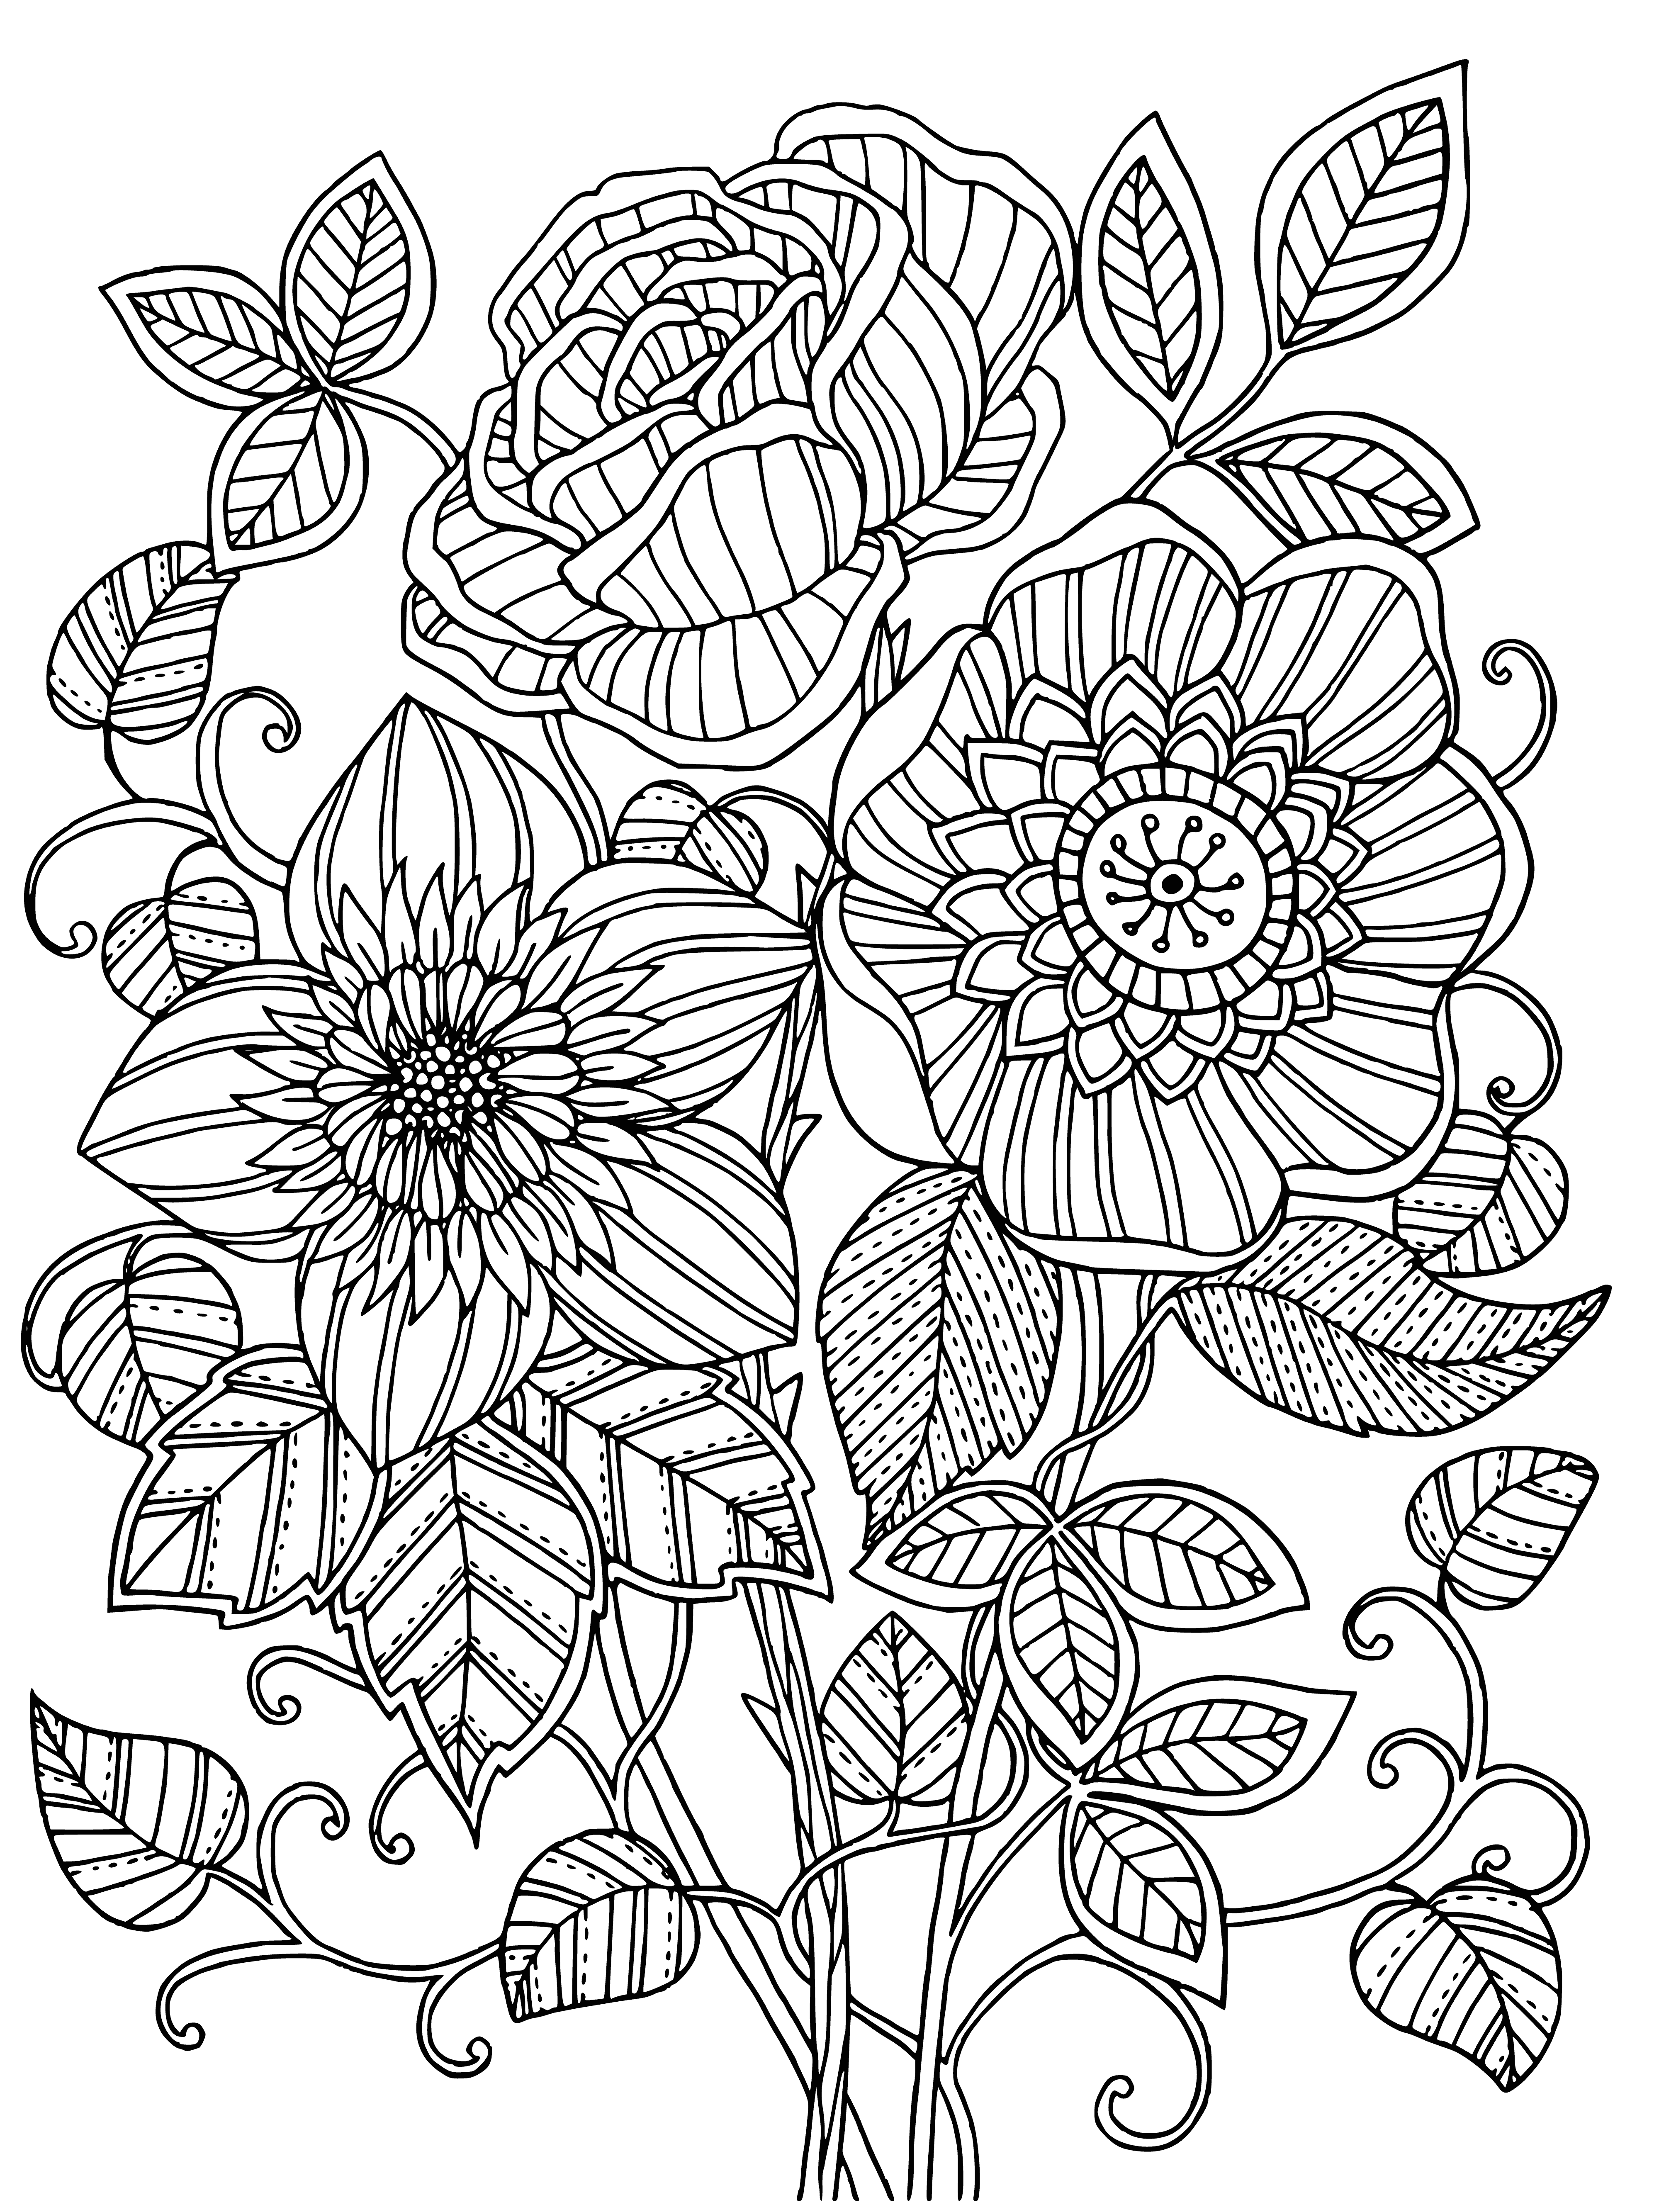 coloring page: Beautiful flower garden coloring page featuring different colors and an eye-catching arrangement.